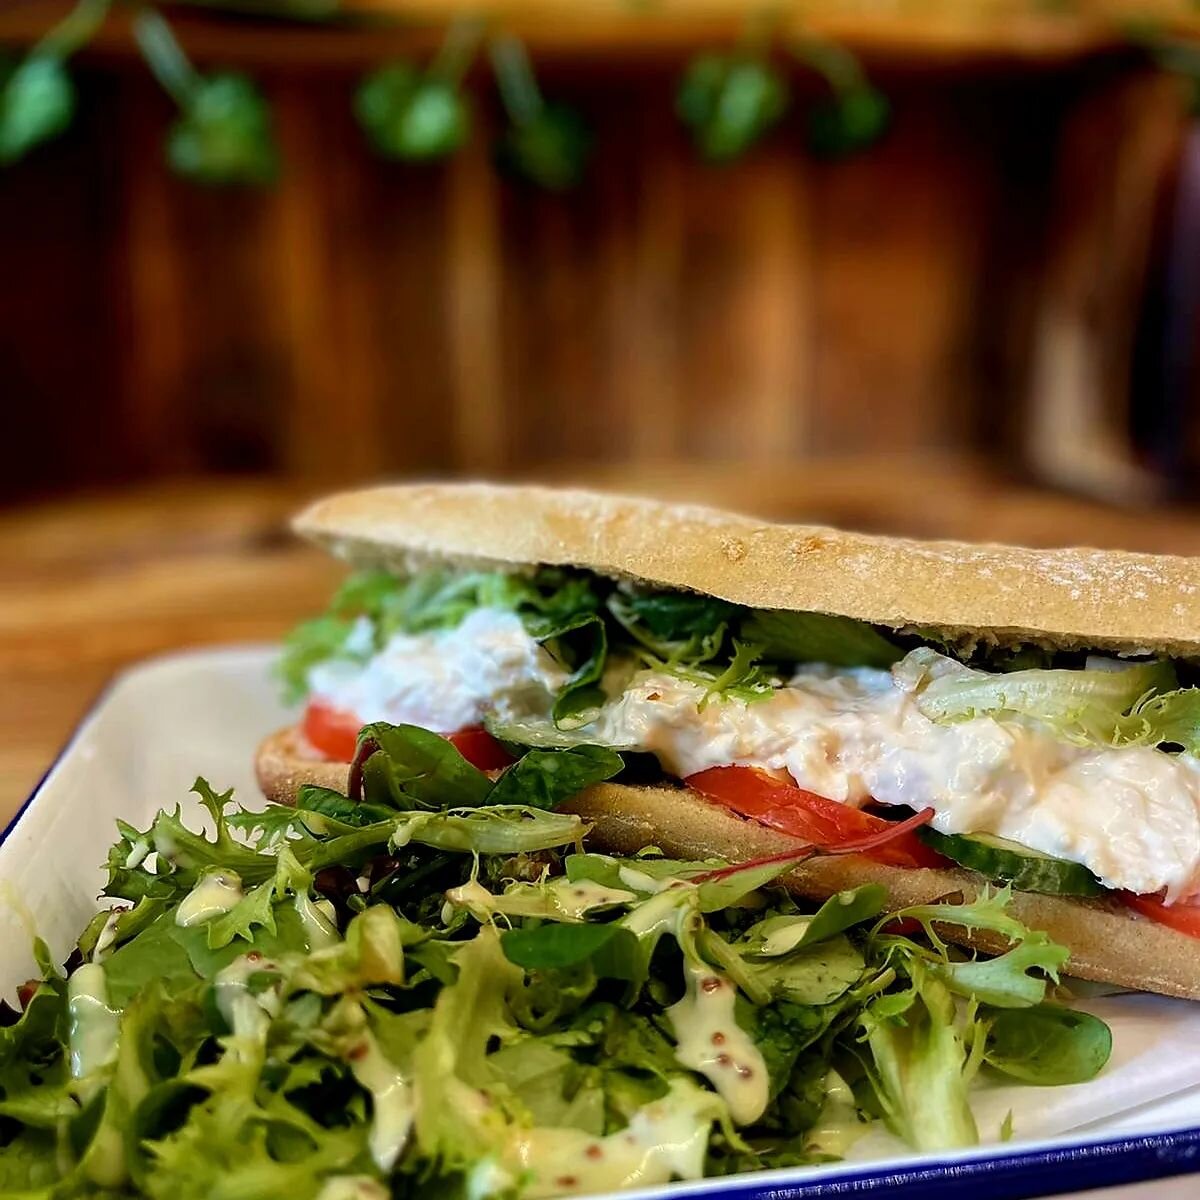 All our baguettes are baked fresh everyday! 

#fresh #sourdough #chickenandbacon #sidesalad